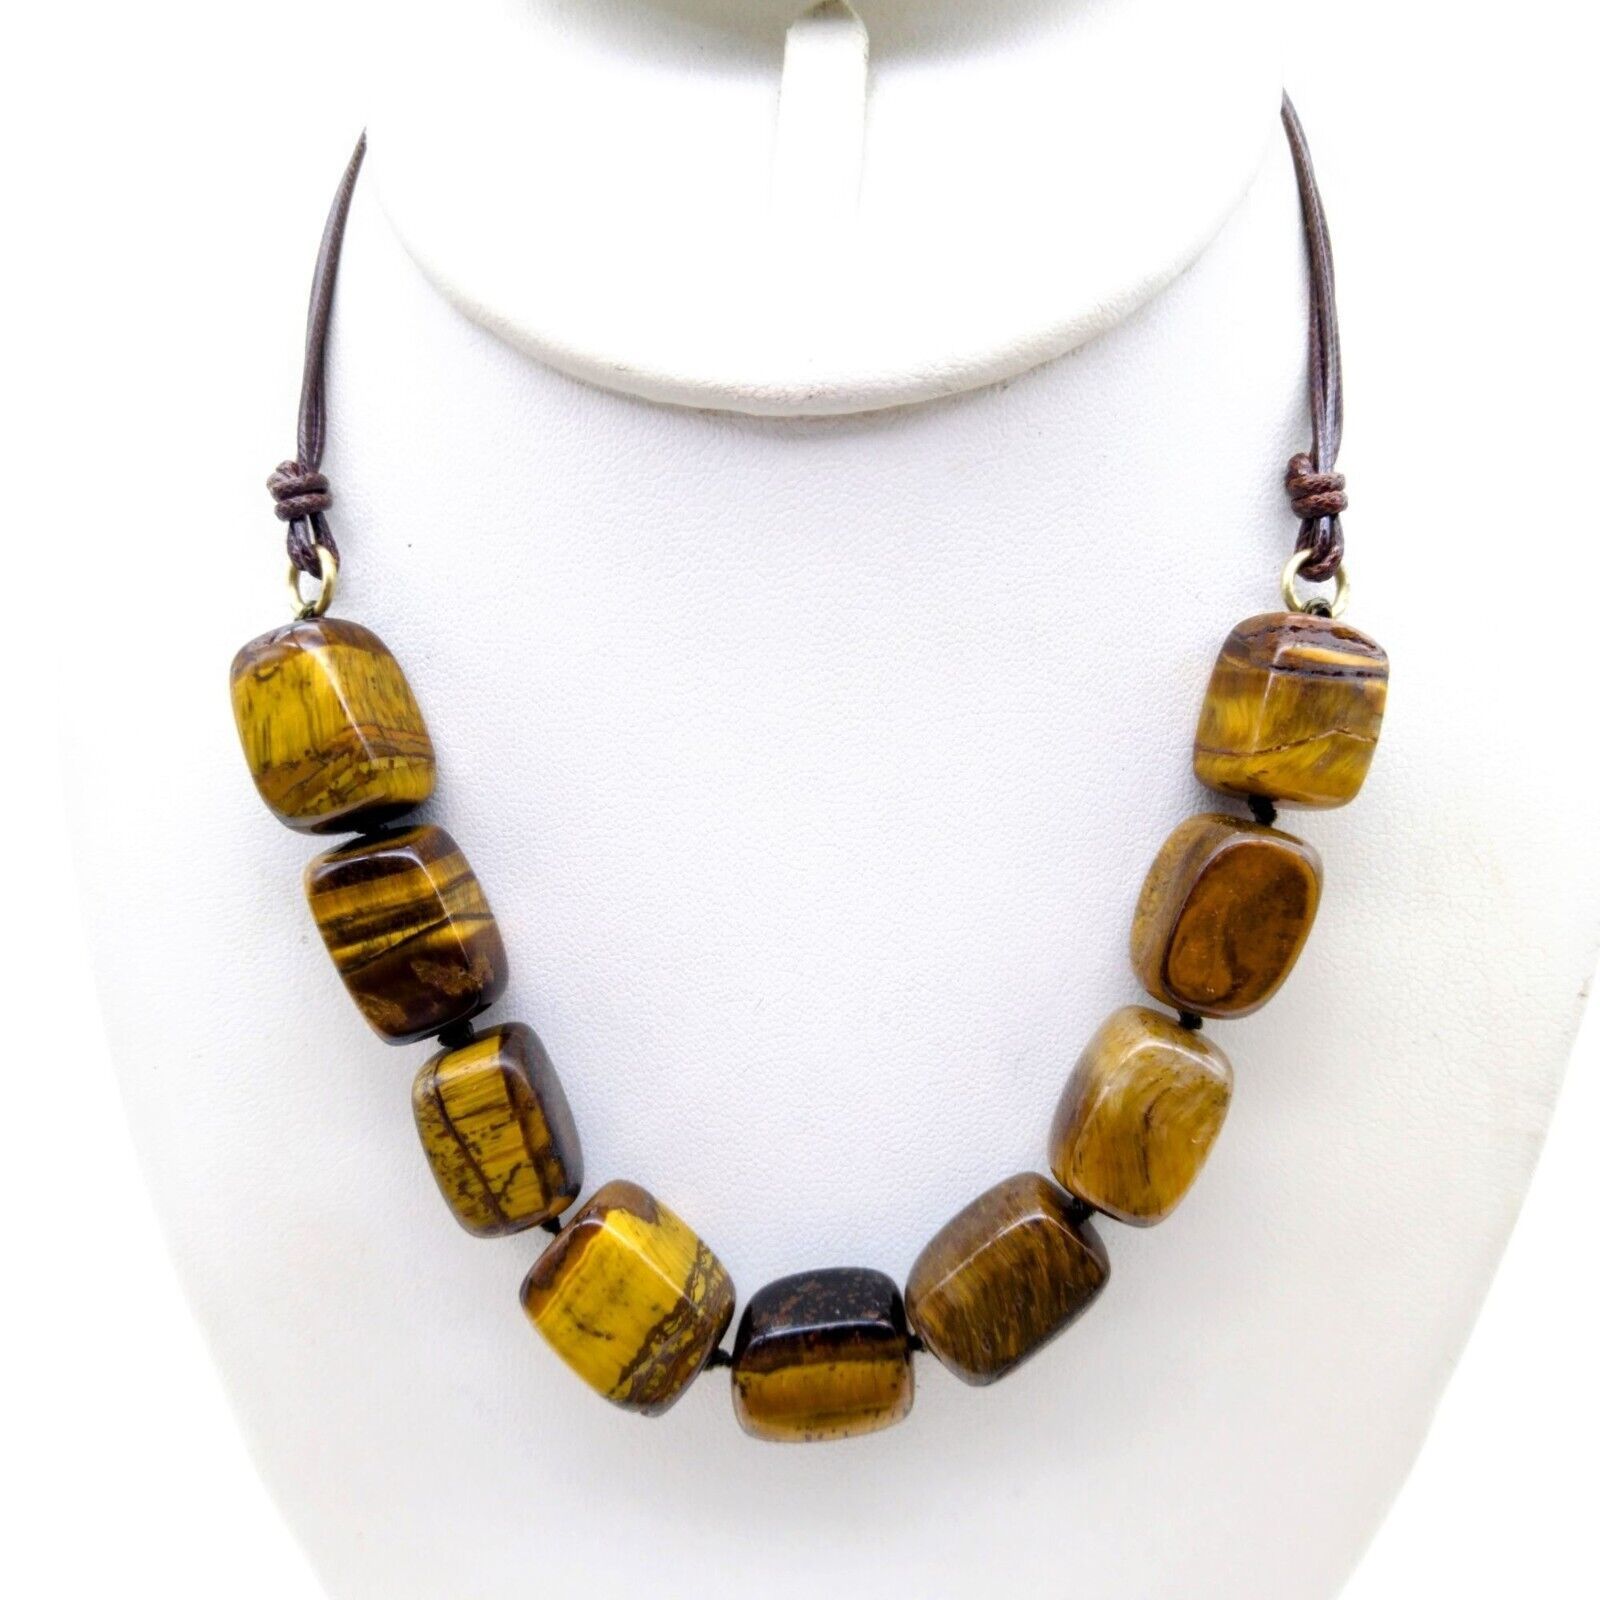 Kenneth Cole New York Chunky Bib Necklace with Tigers Eye Cubes - $28.06